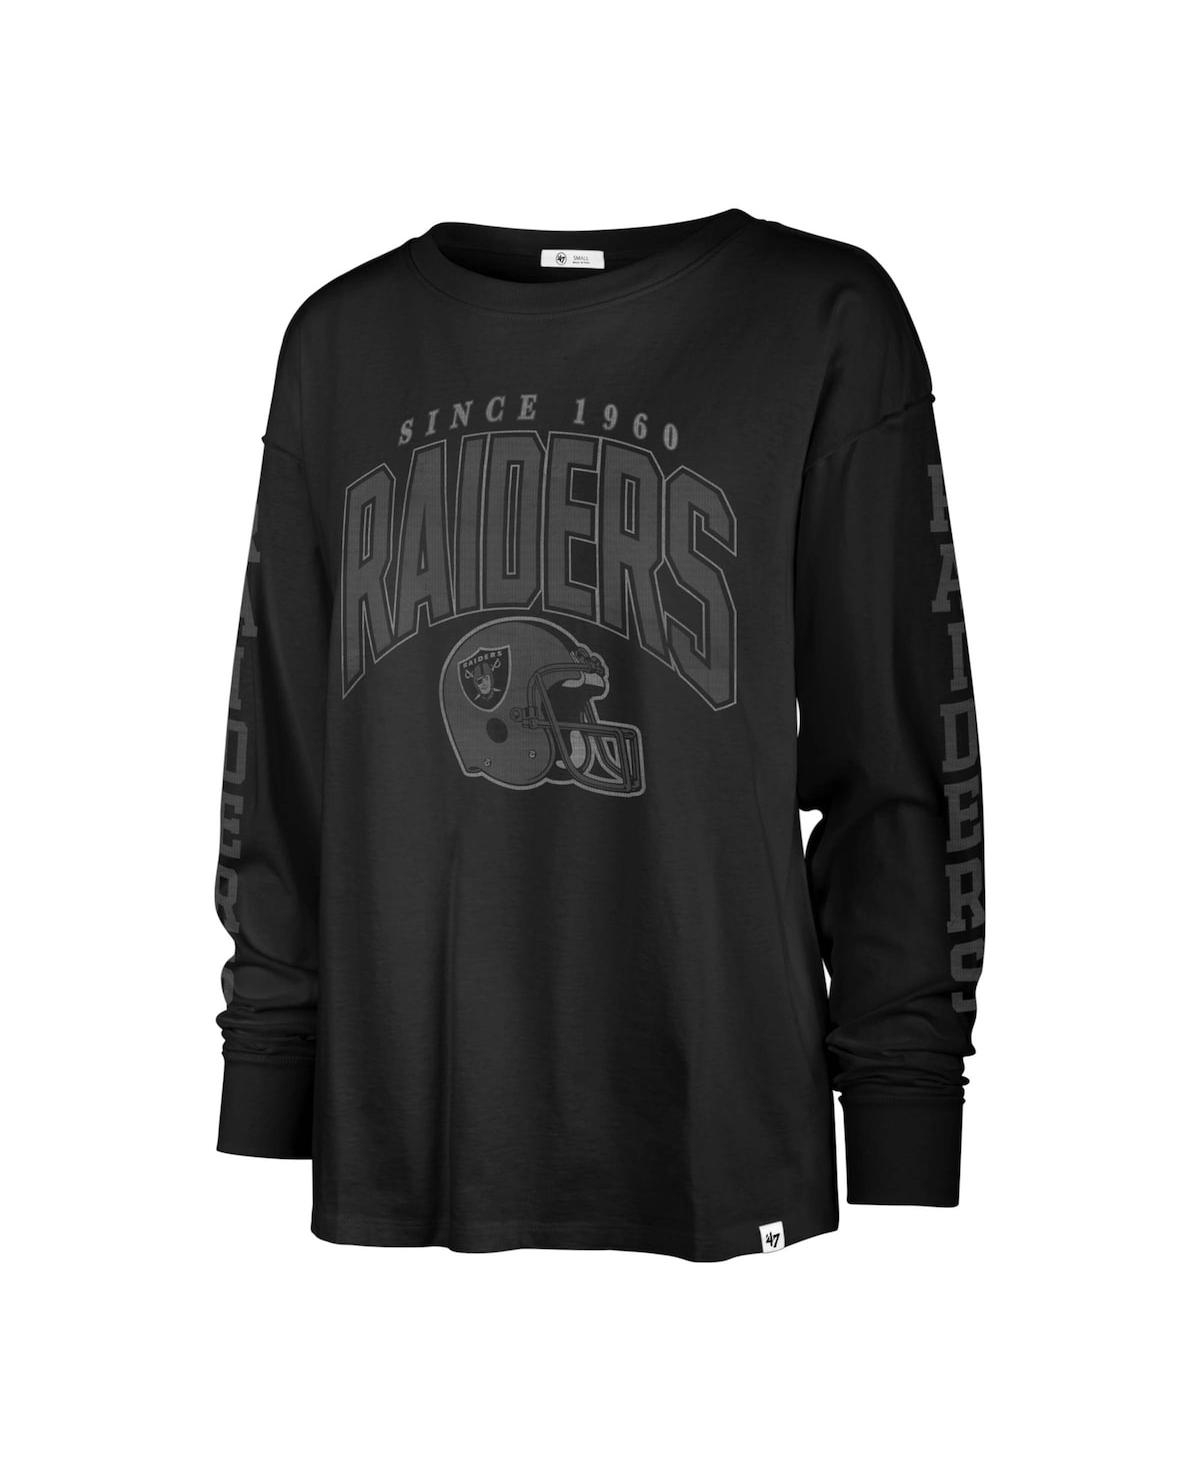 47 Brand / Women's 2021-22 City Edition Los Angeles Lakers Grey